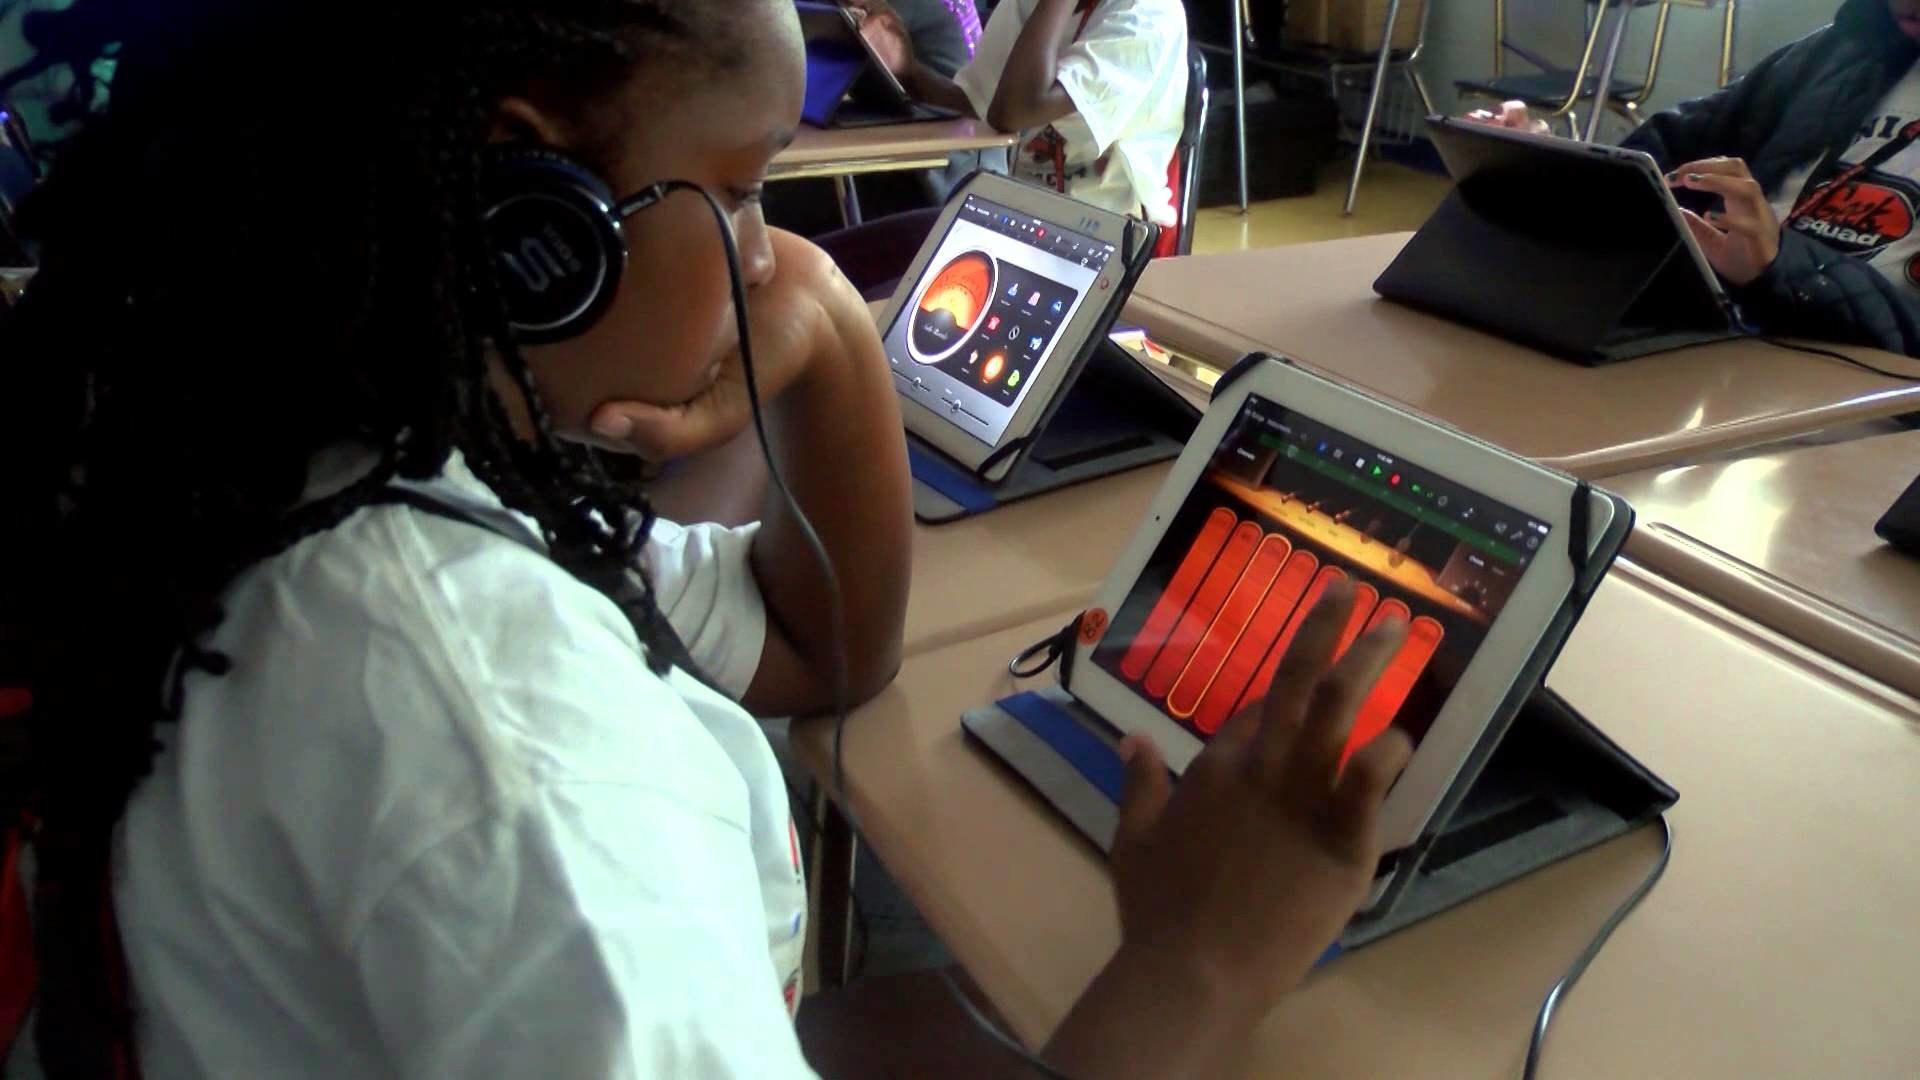 1920x1080 Students use latest technology at Best Buy's Geek Squad Academy